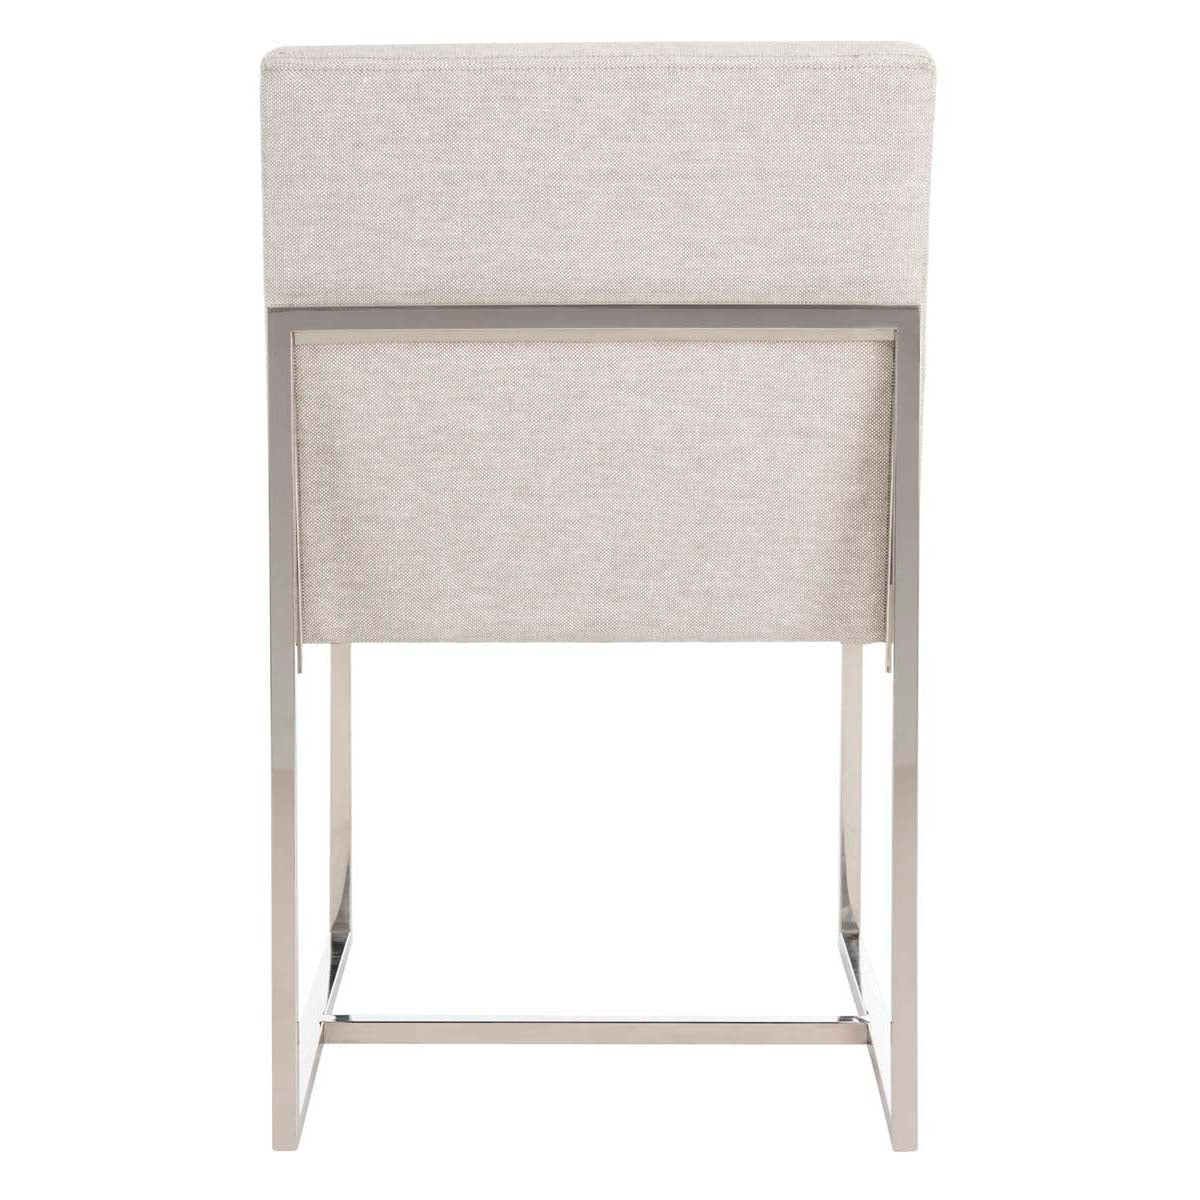 Safavieh Couture Lombardi Chrome Dining Chair - Grey / White